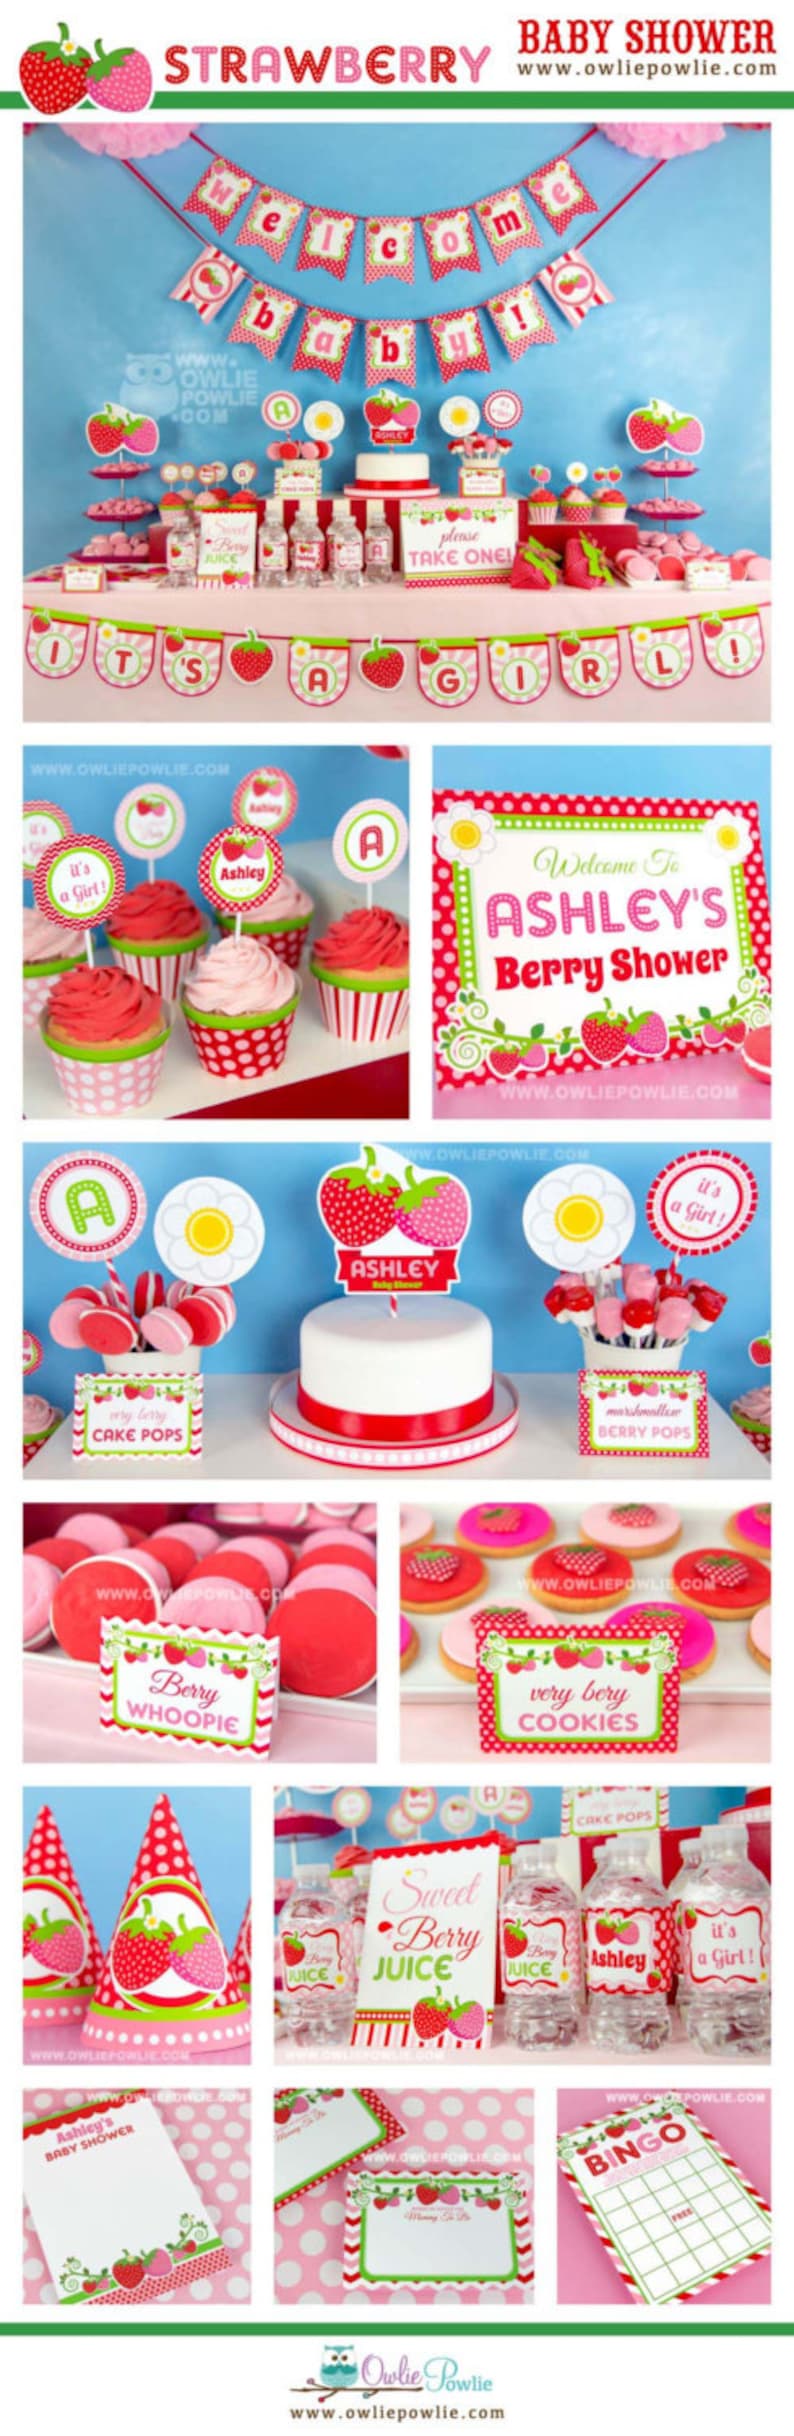 Strawberry BABY Shower Party Printable Package & Invitation, girl baby shower decorations, strawberry party decor, berry baby shower invites image 8